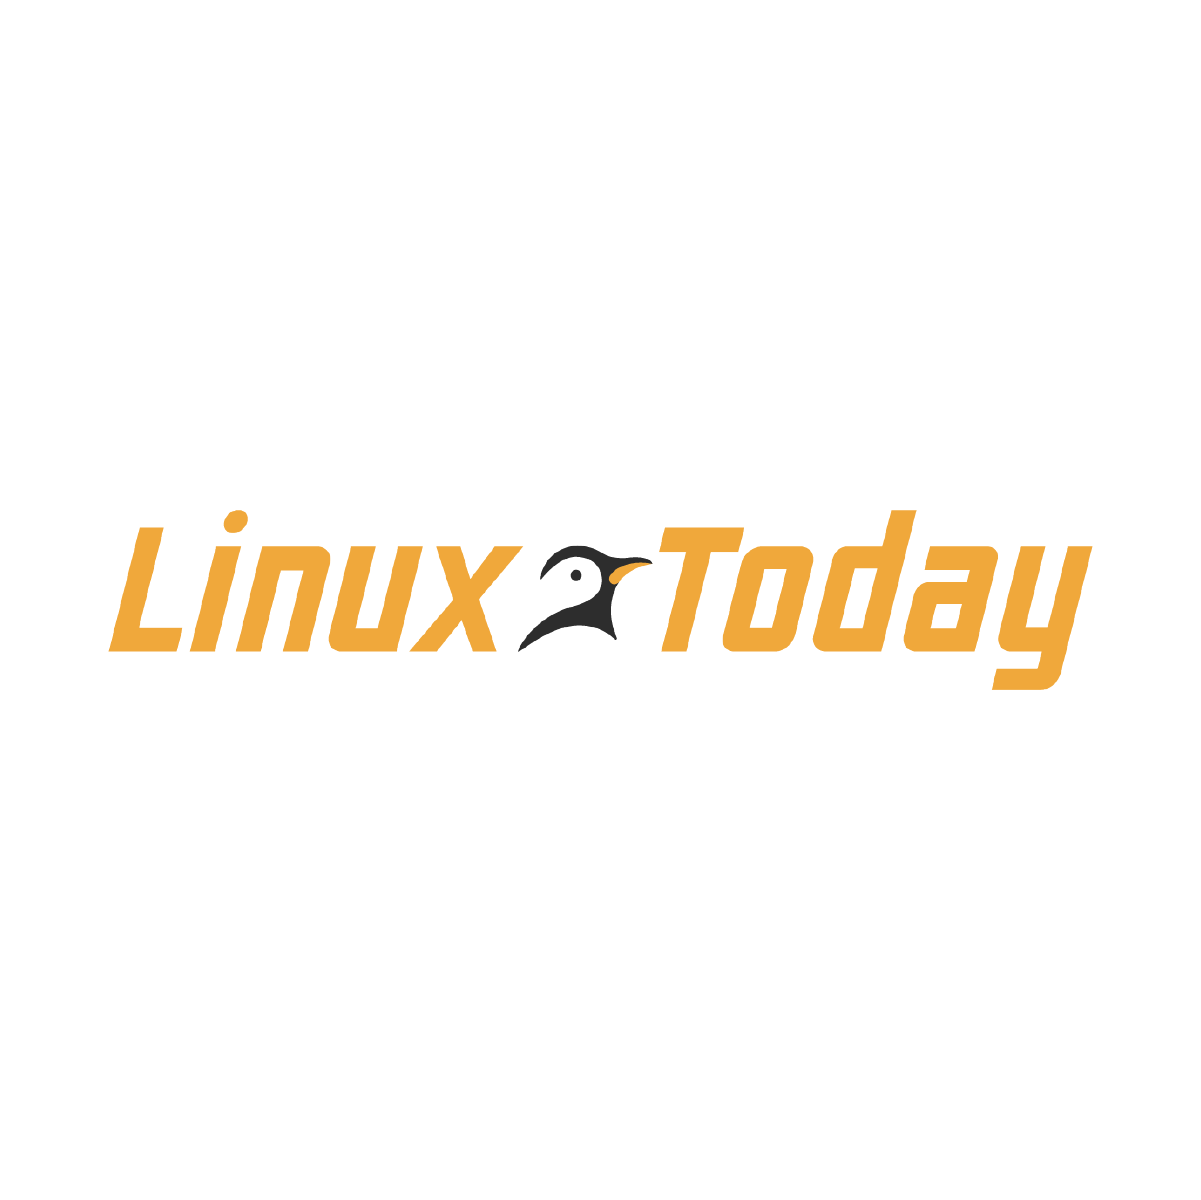 https://www.linuxtoday.com/wp-content/uploads/2021/07/Linux_opengraph_square2-01.png